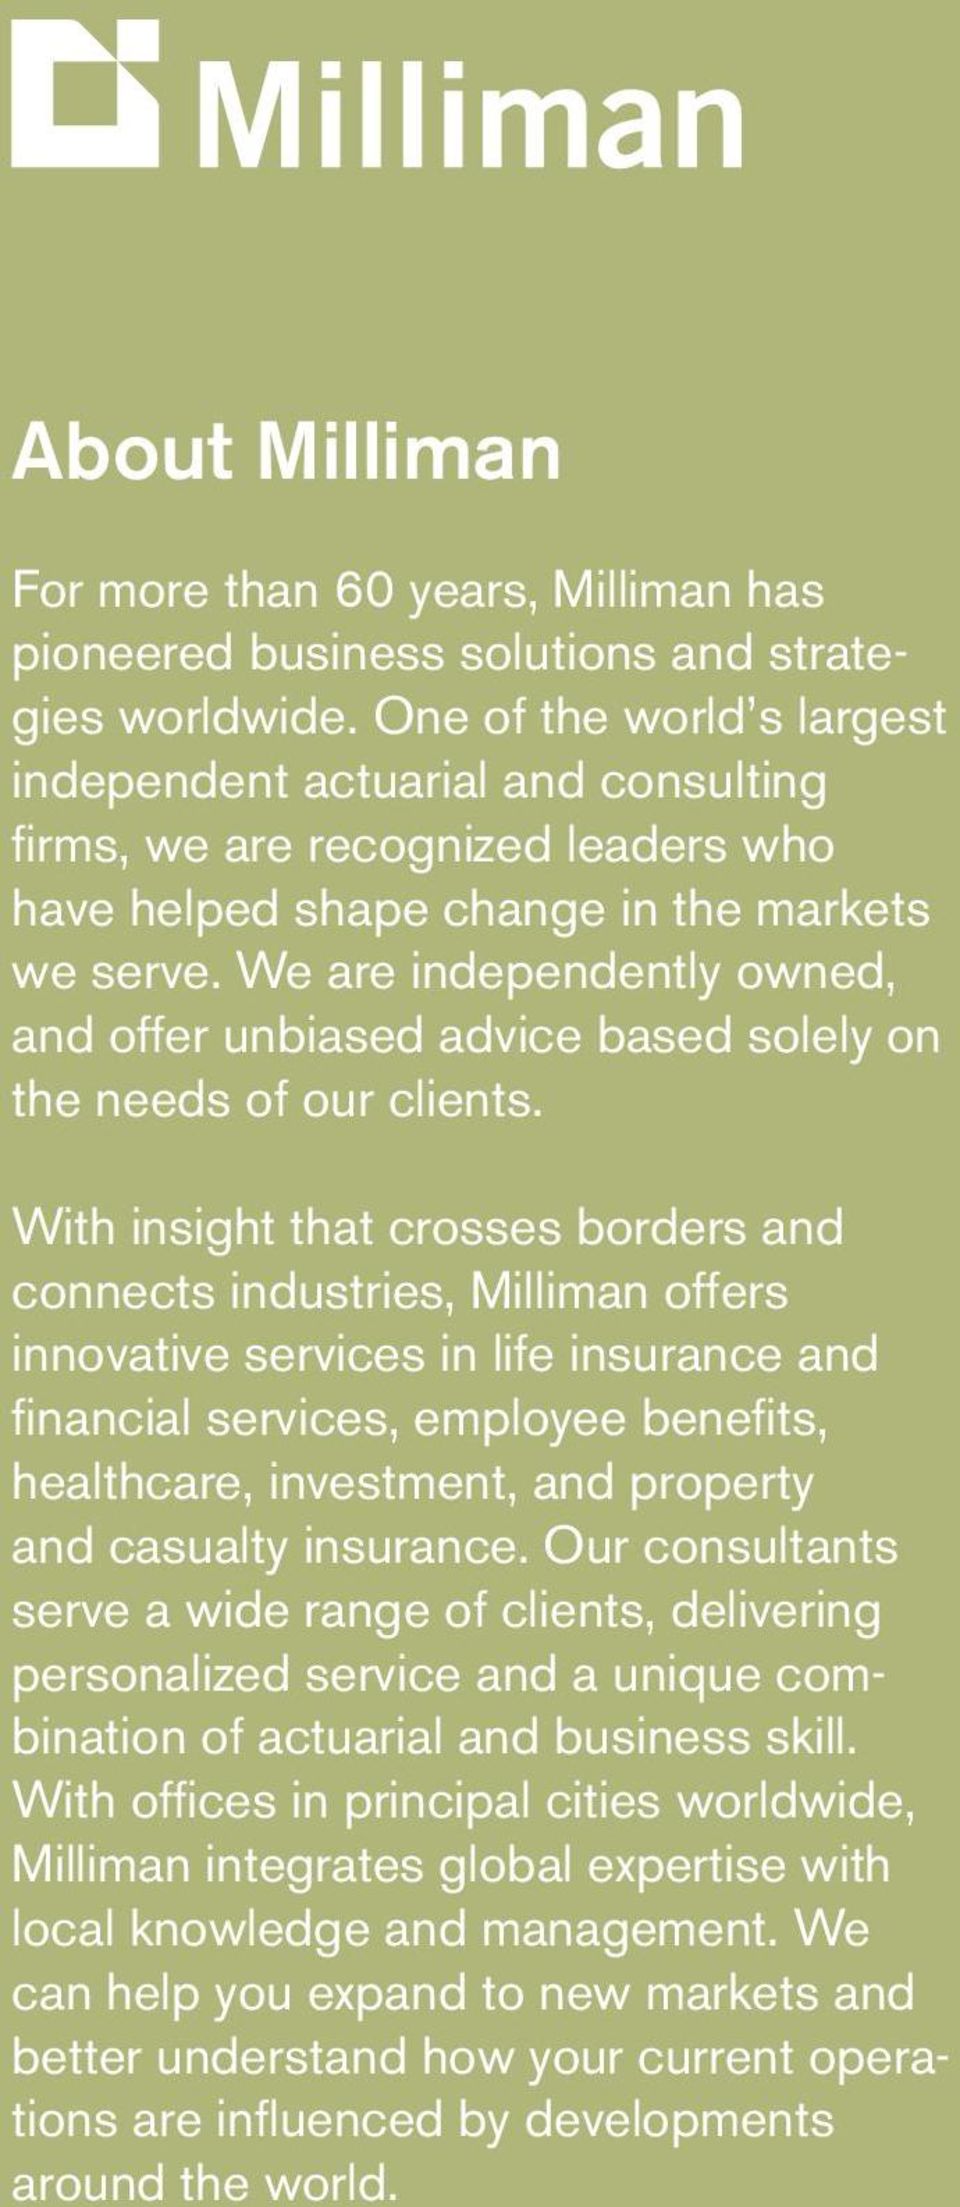 We are independently owned, and offer unbiased advice based solely on the needs of our clients.